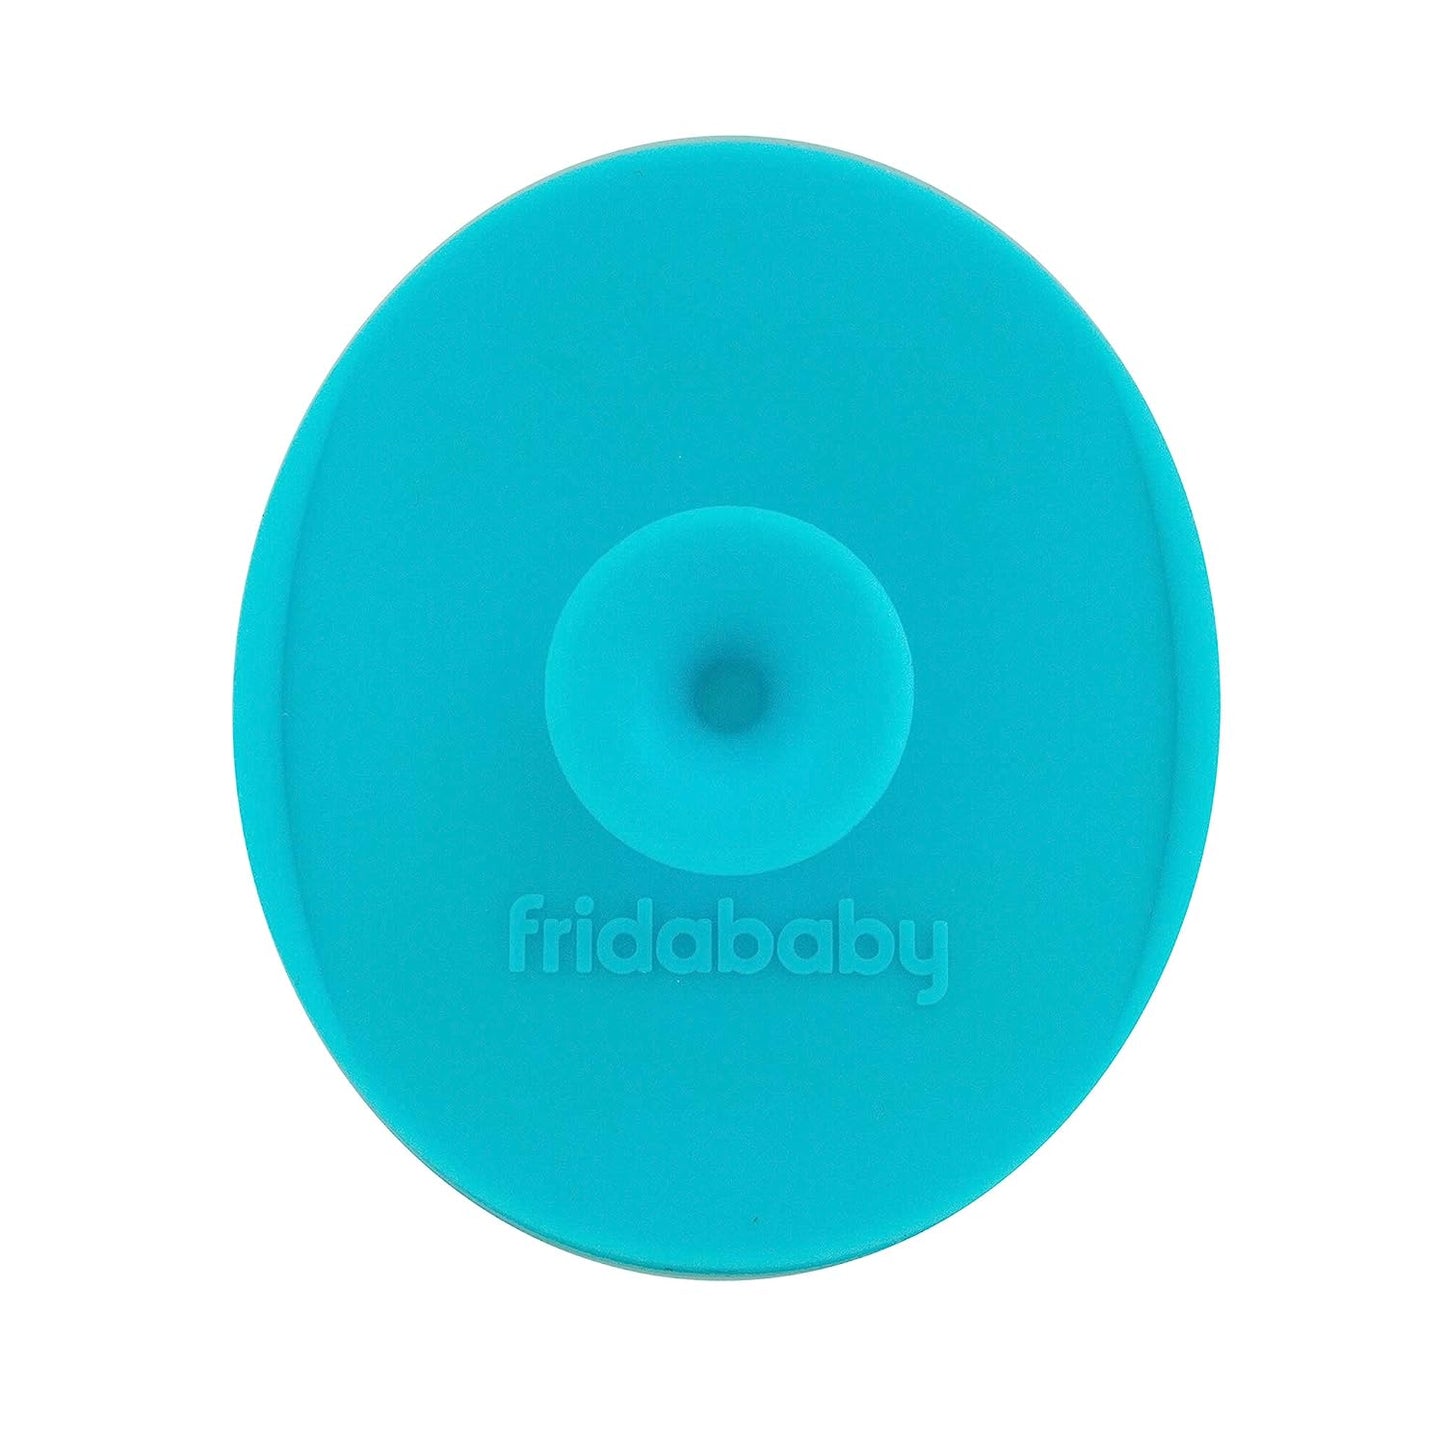 Fridababy DermaFrida The SkinSoother Baby Silicone Bath Brush Baby Accessories for Dry Skin, Milk Scab and Eczema Pack of 2 - Baby Bliss